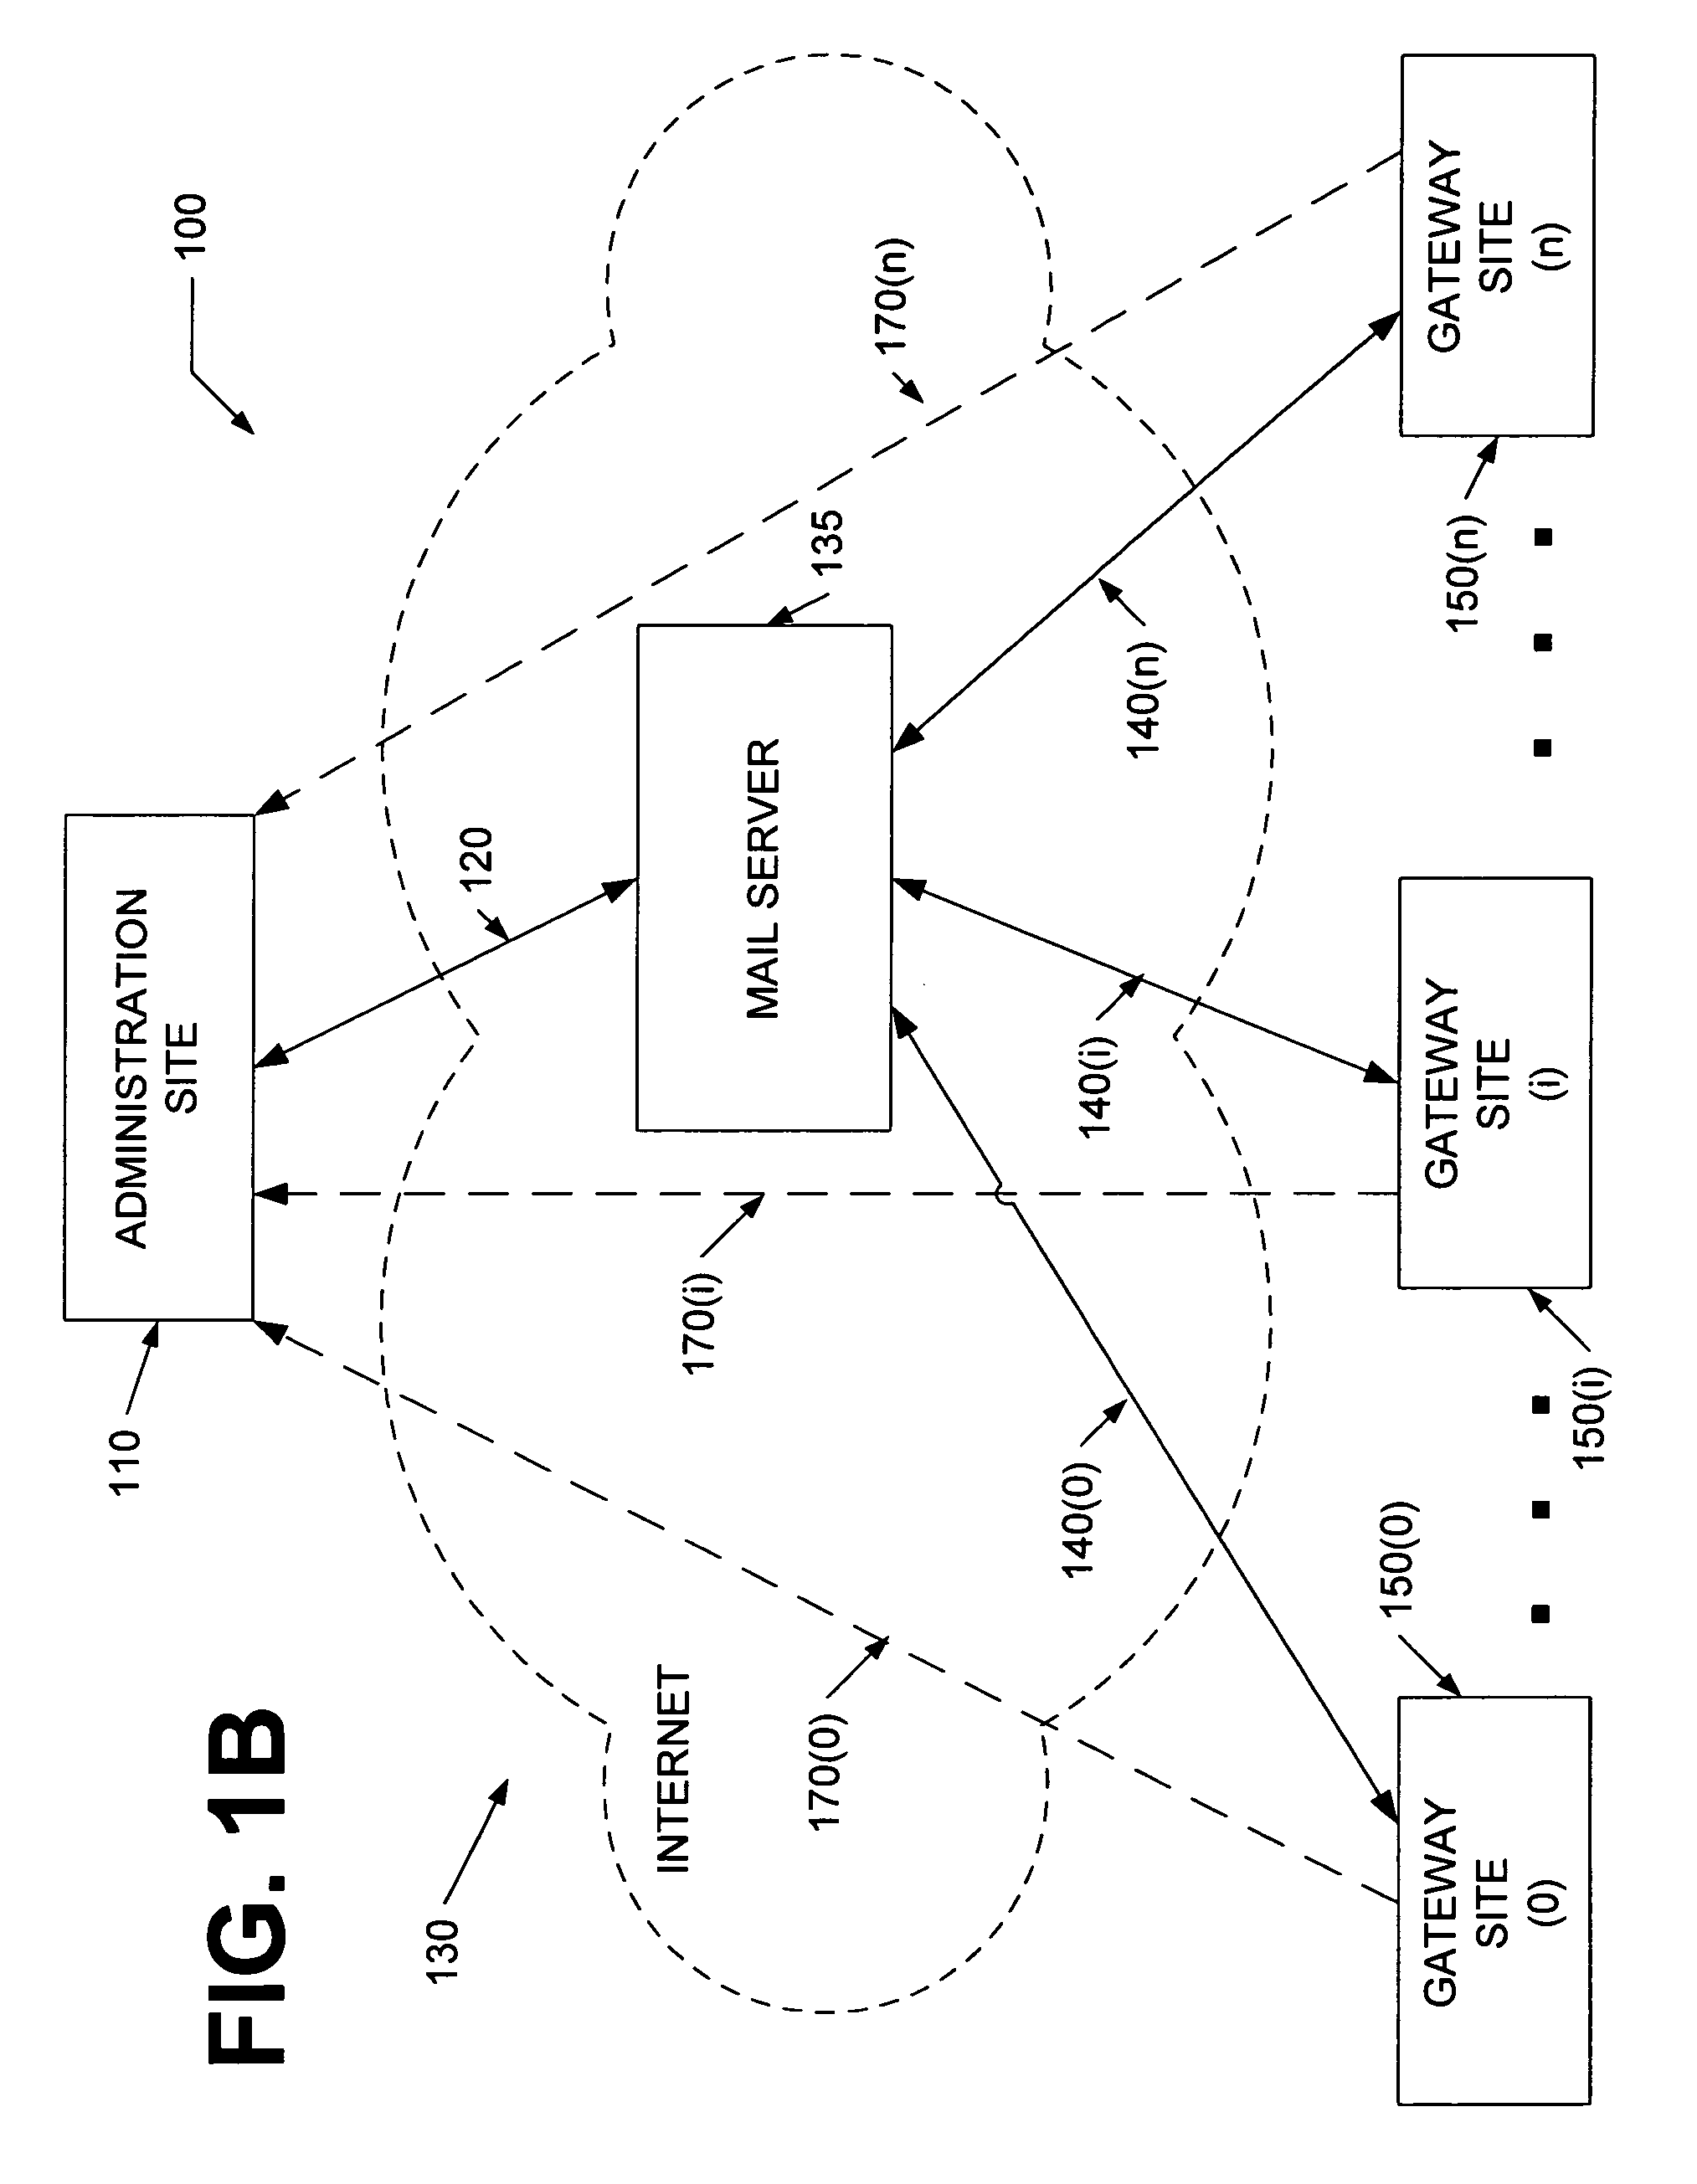 System and method for secure management or remote systems